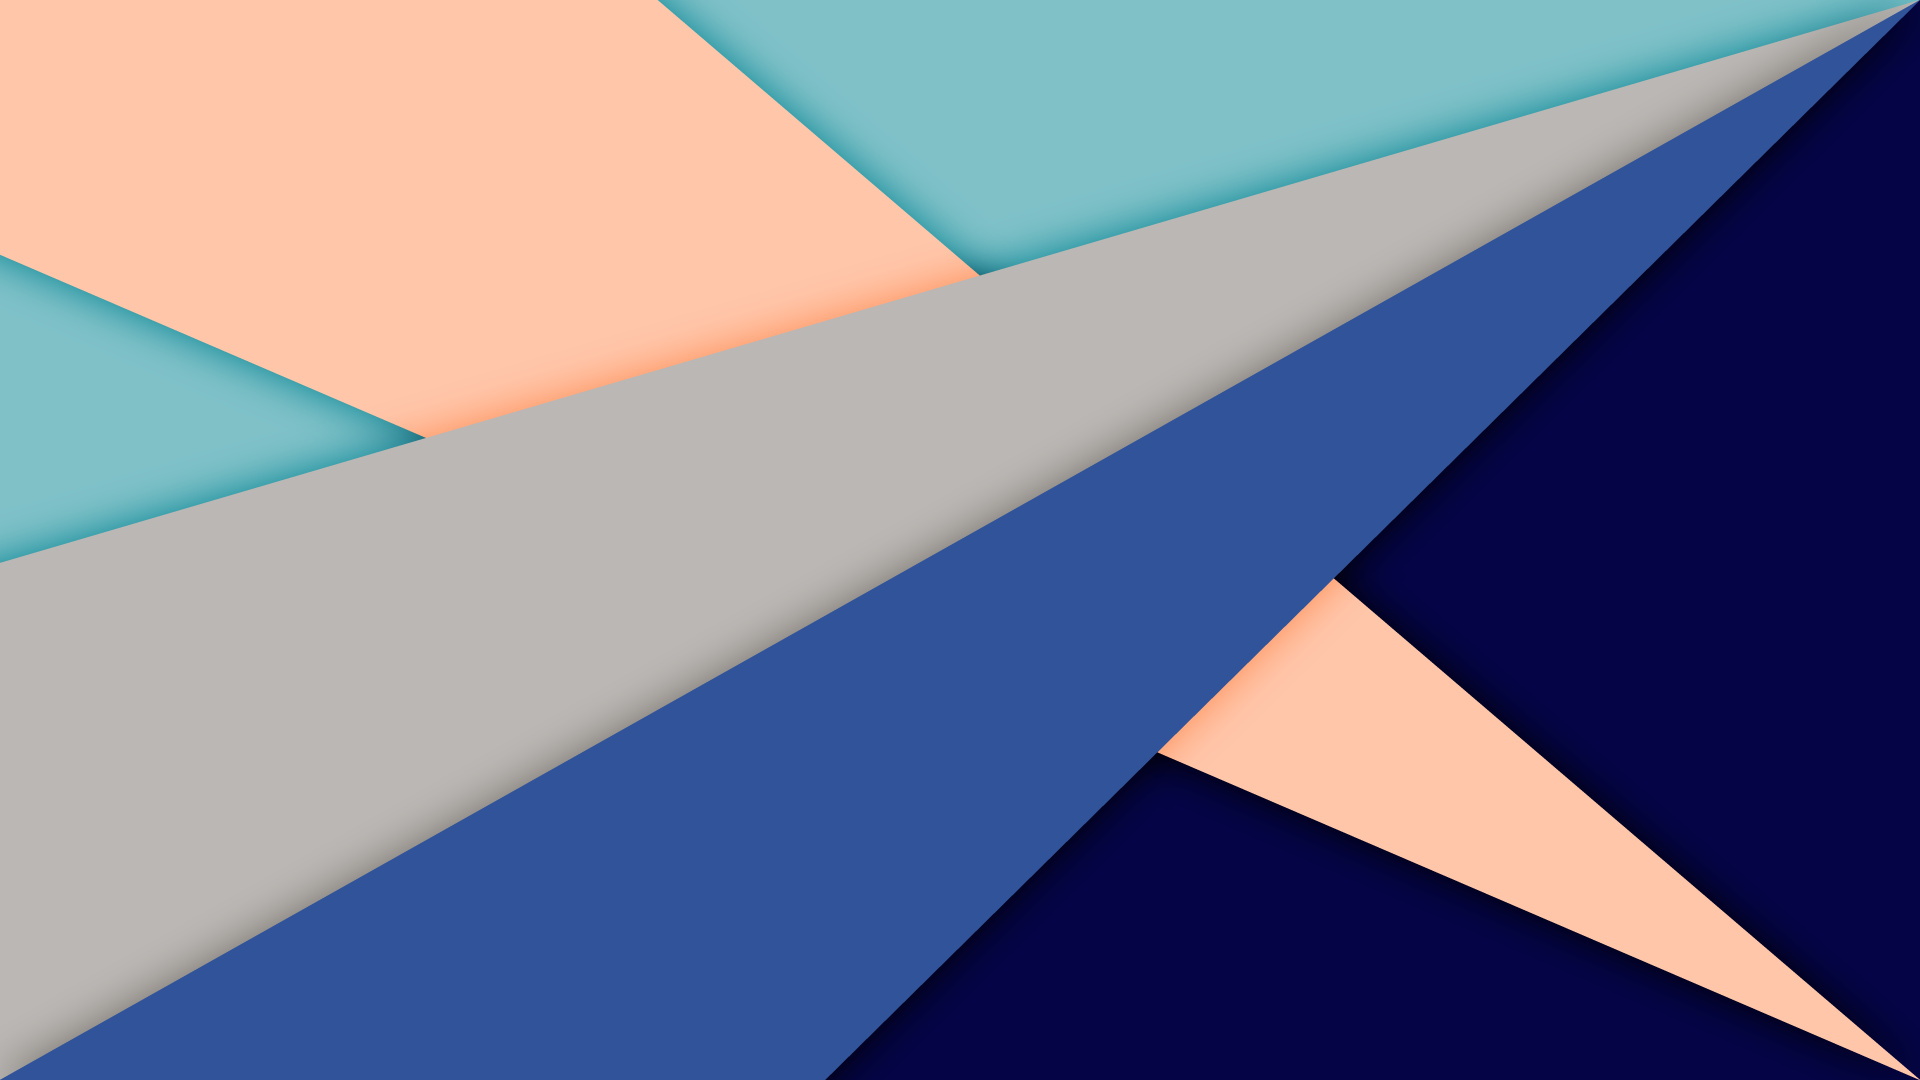 Abstract shapes, HD wallpaper, Background image, Colorful abstract, 1920x1080 Full HD Desktop